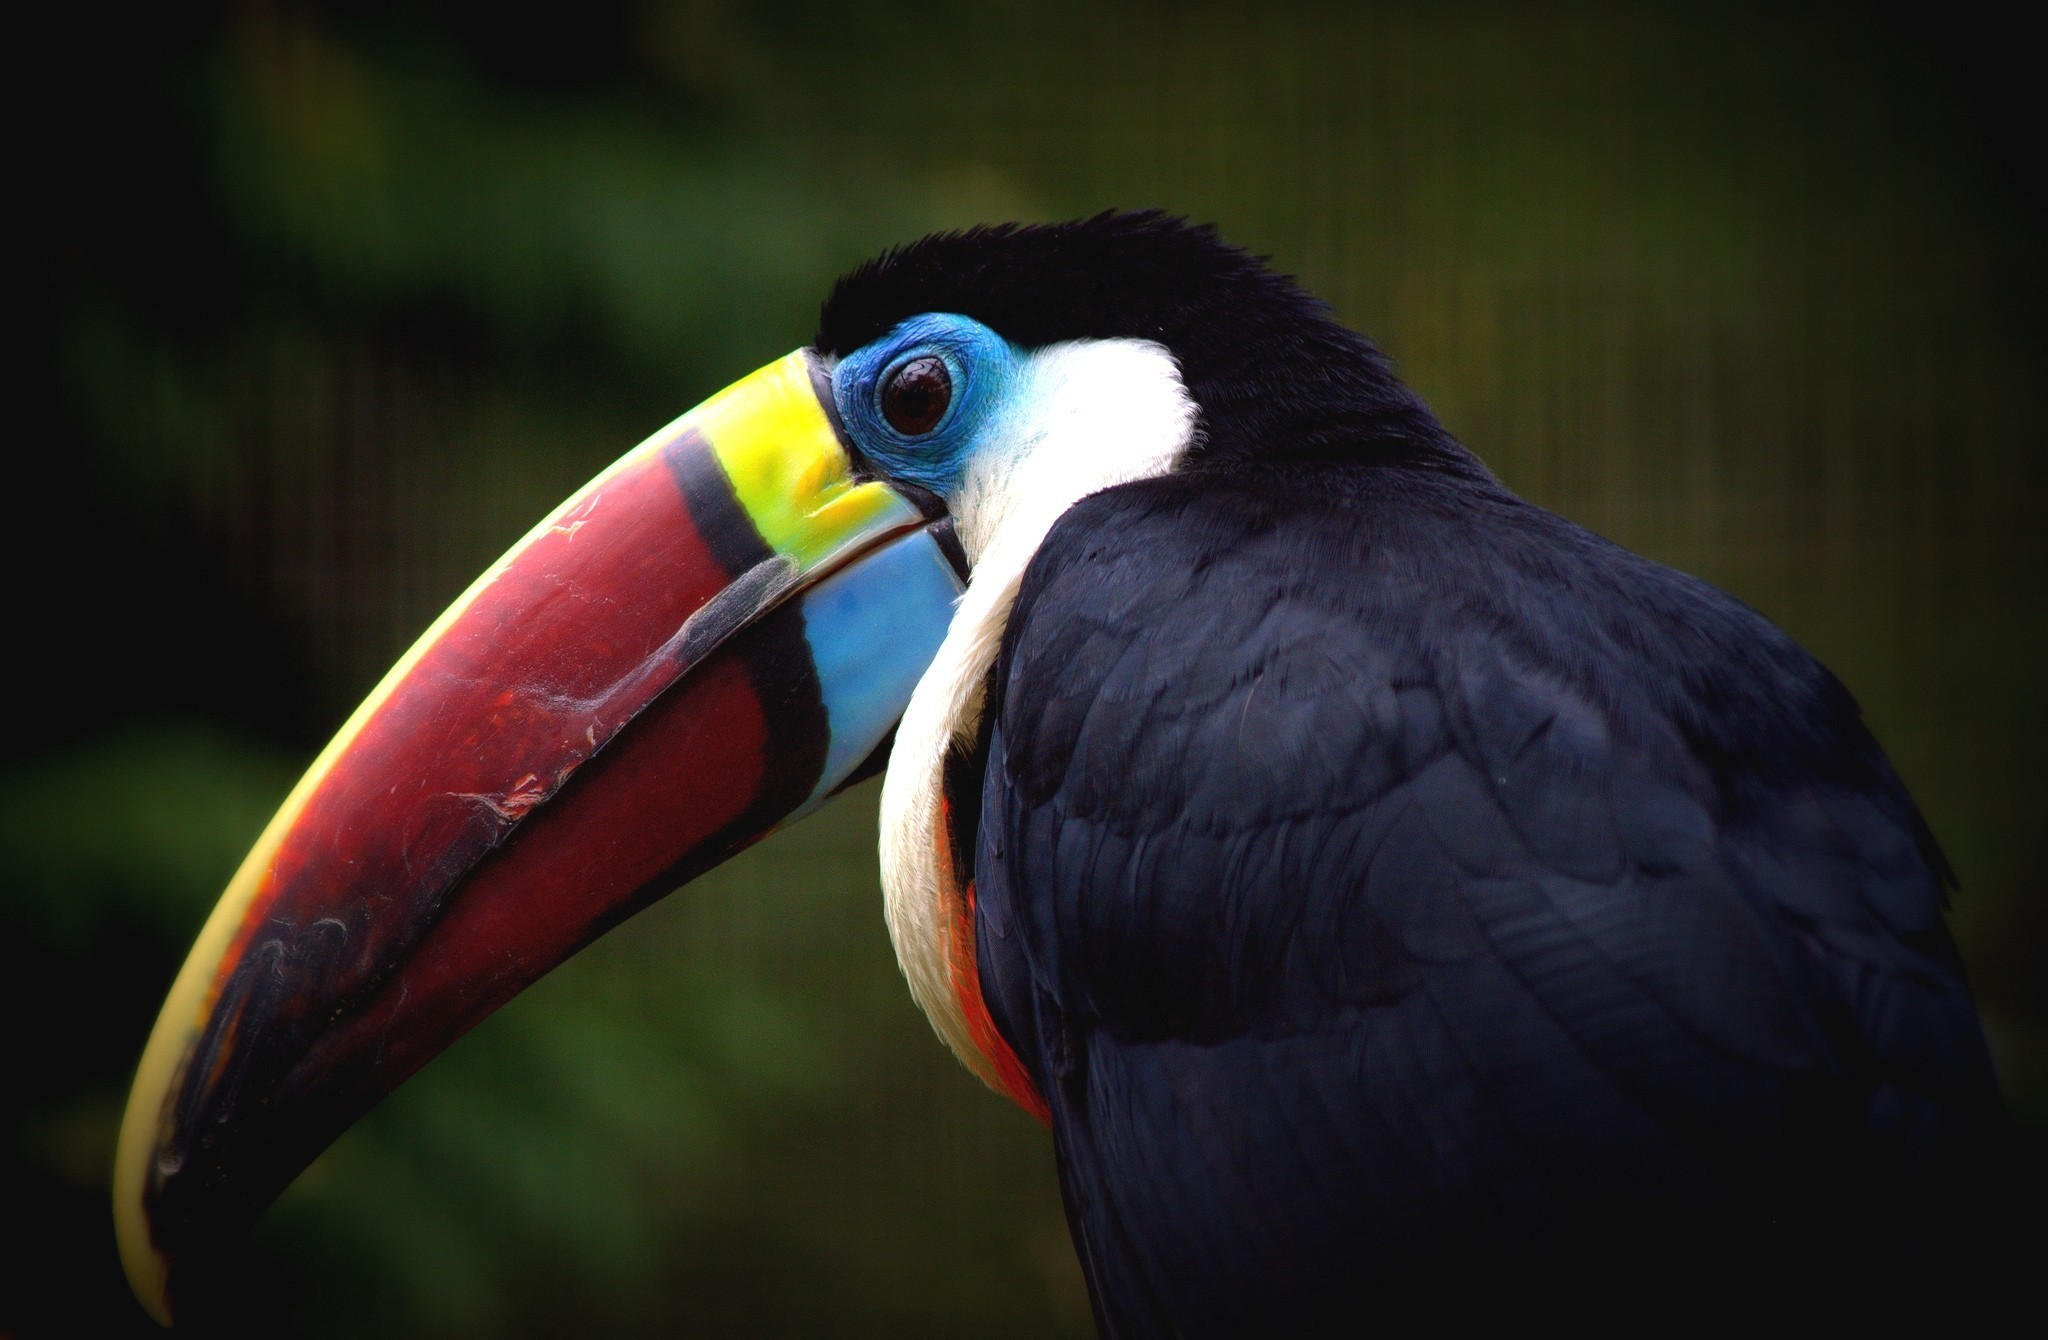 Toucan images